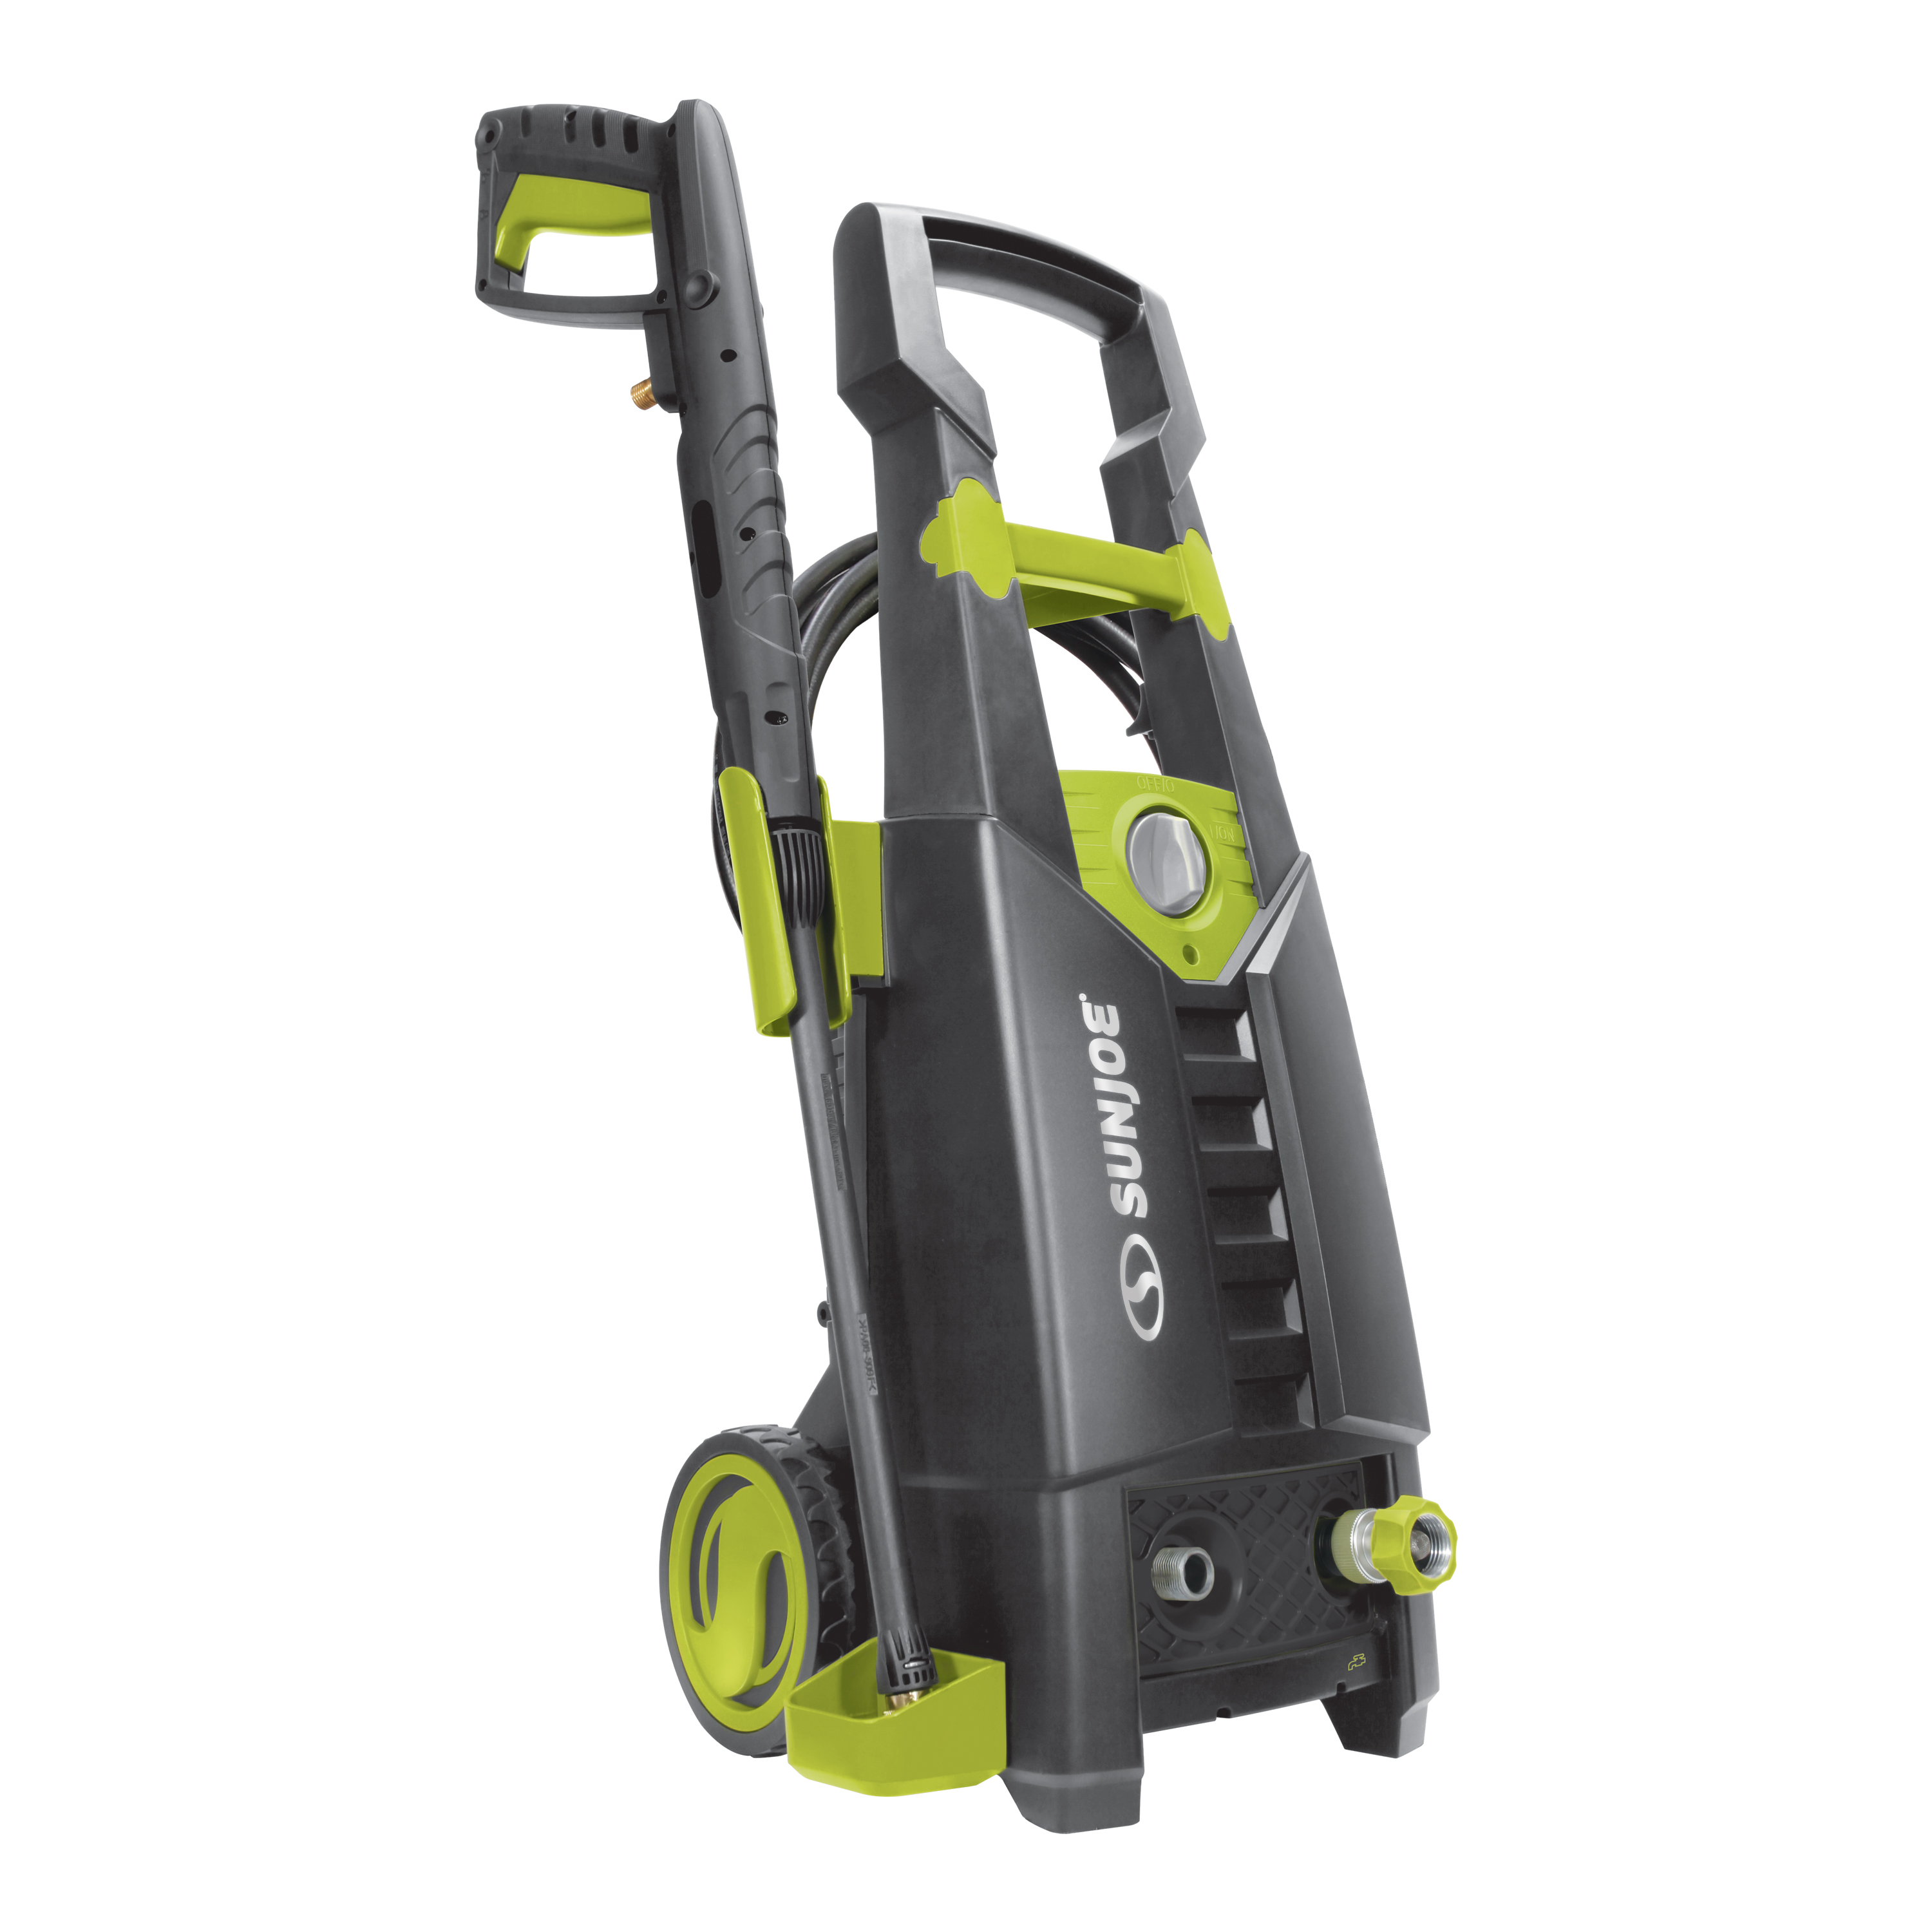 Sun Joe SPX2688-MAX Electric Pressure Washer, 13-Amp, Foam Cannon, Quick-Connect Tips - image 4 of 6